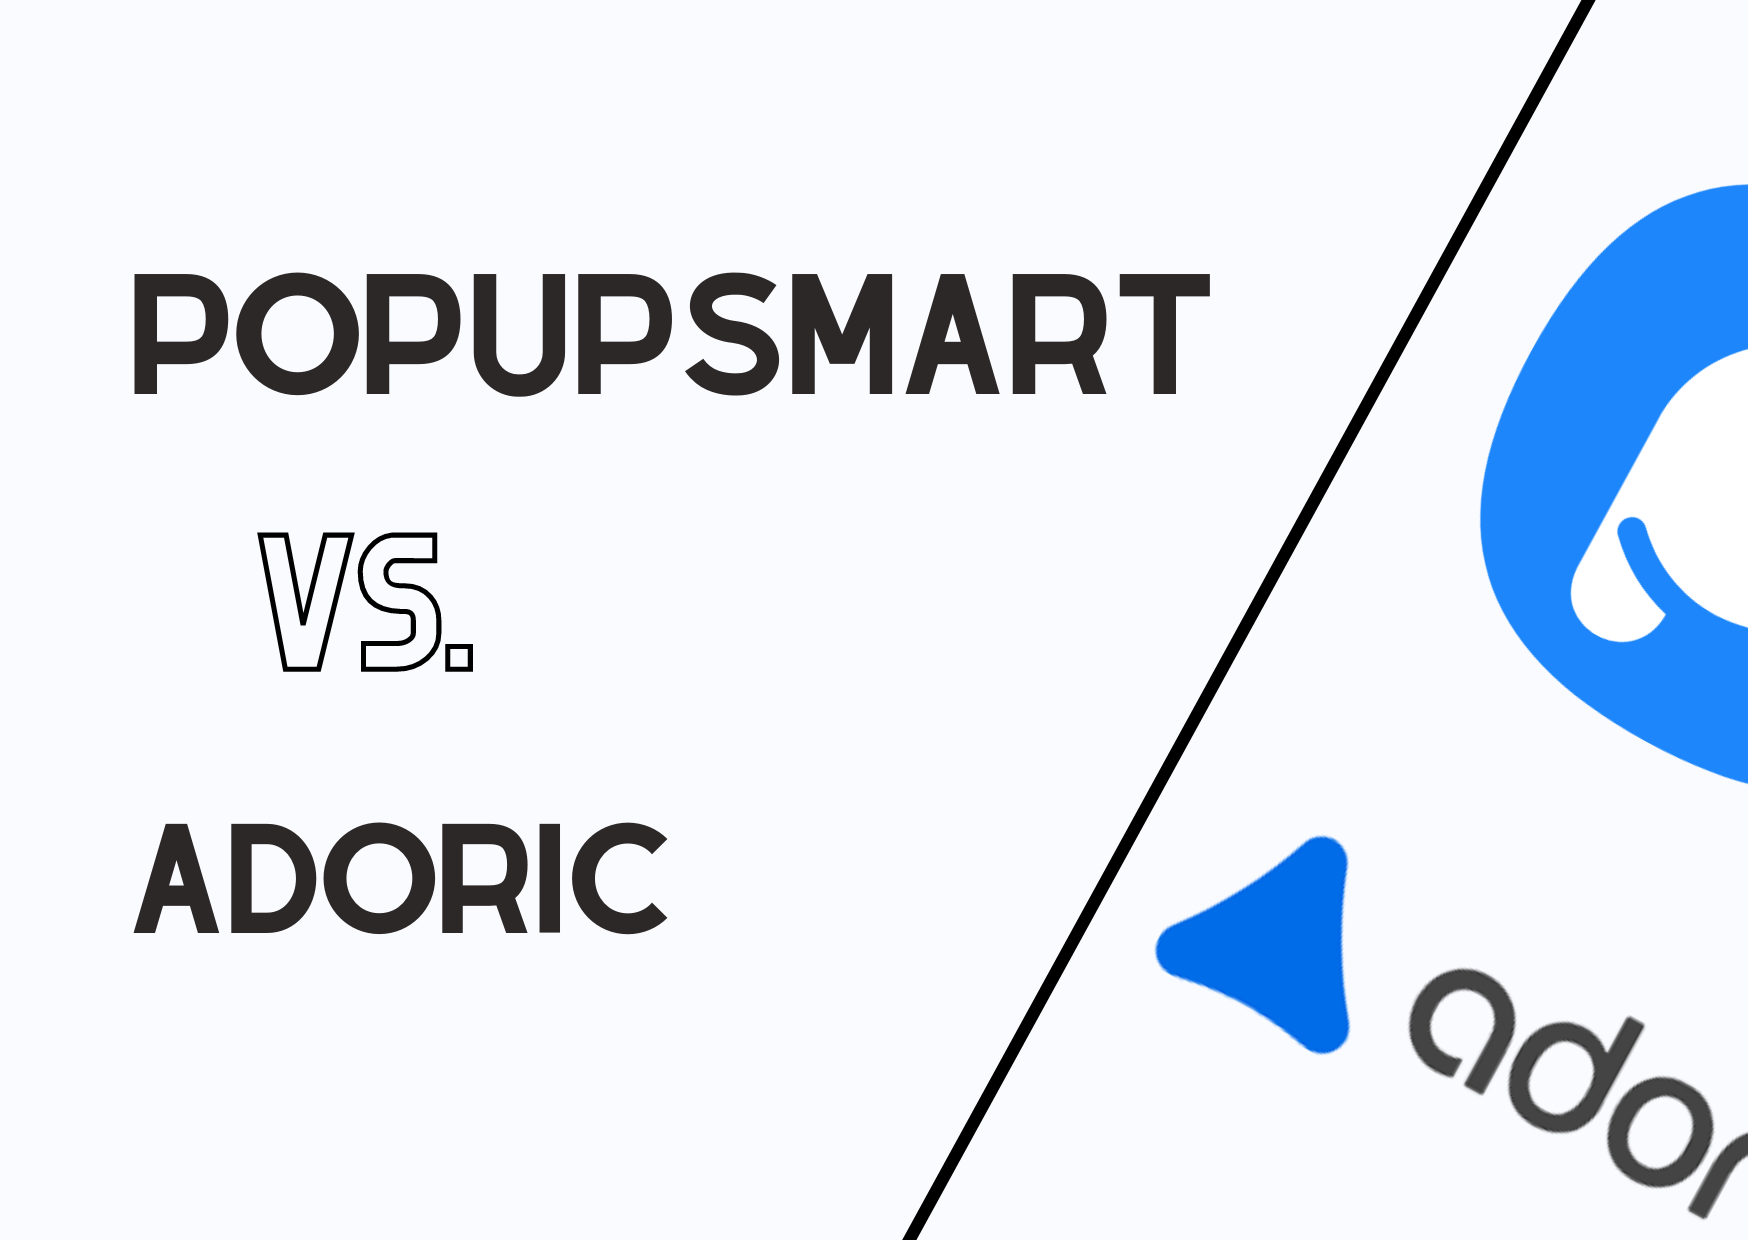 the comparison of Popupsmart and Adoric with their logos